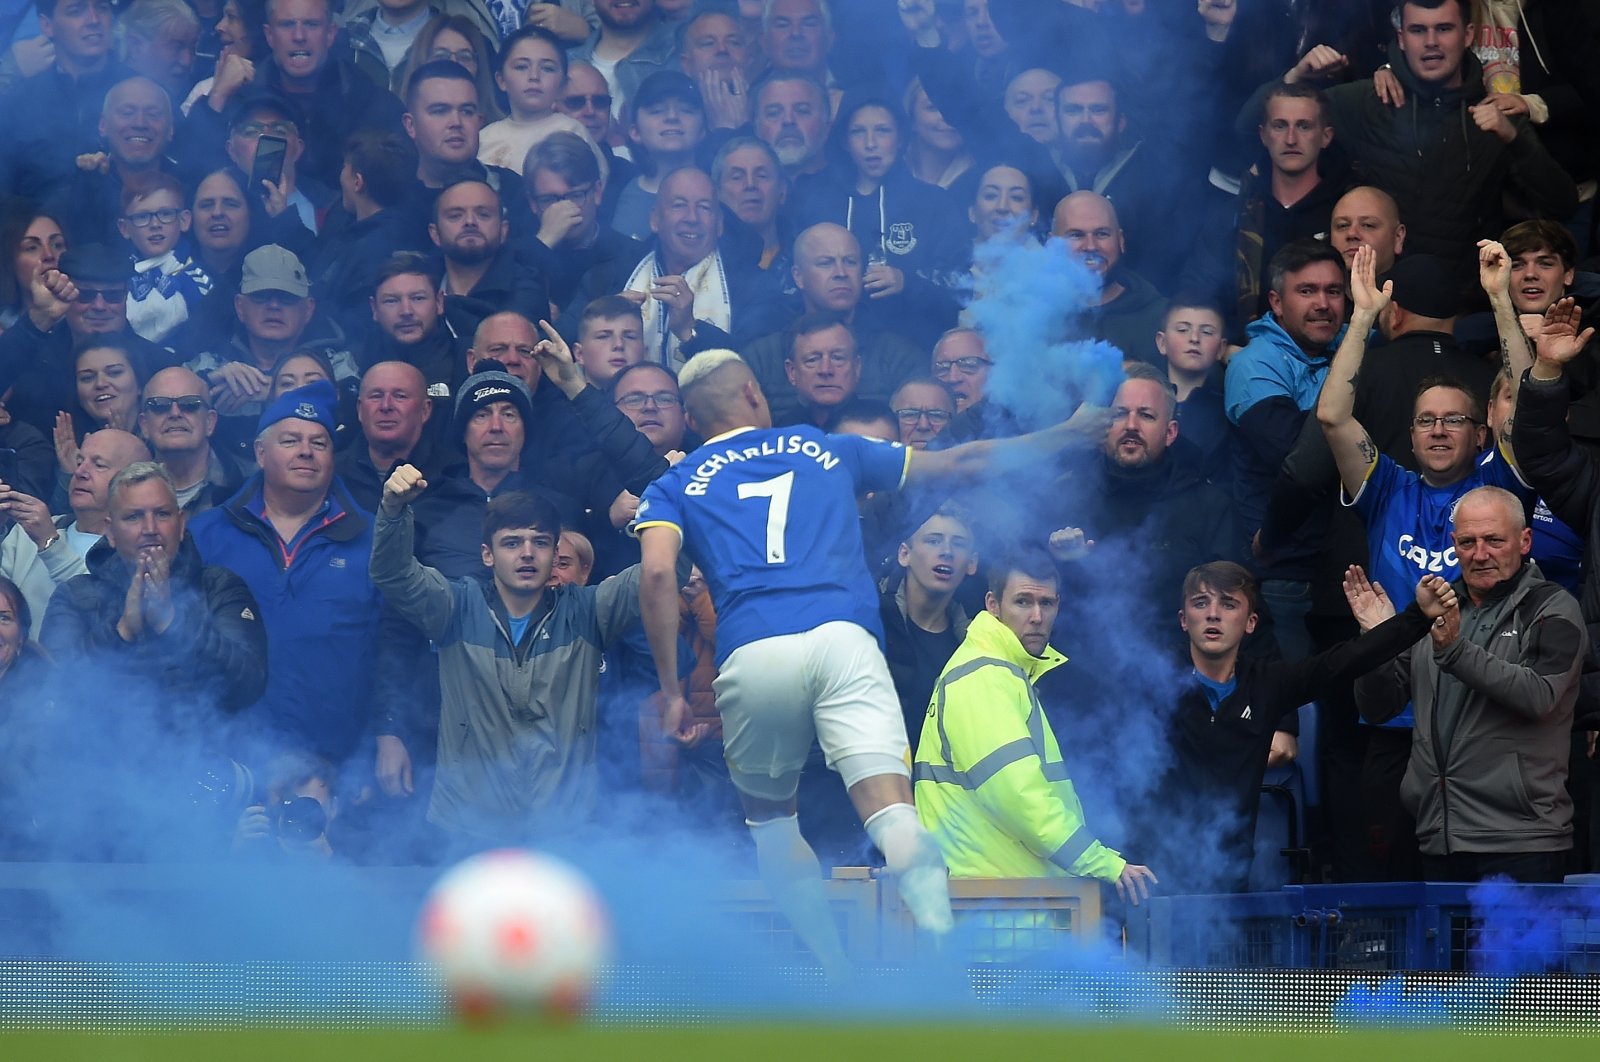 Everton&#039;s Richarlison runs with a lit flare after scoring the opening goal during the English Premier League match between Everton FC and Chelsea FC in Liverpool, Britain, May 1, 2022. (EPA)